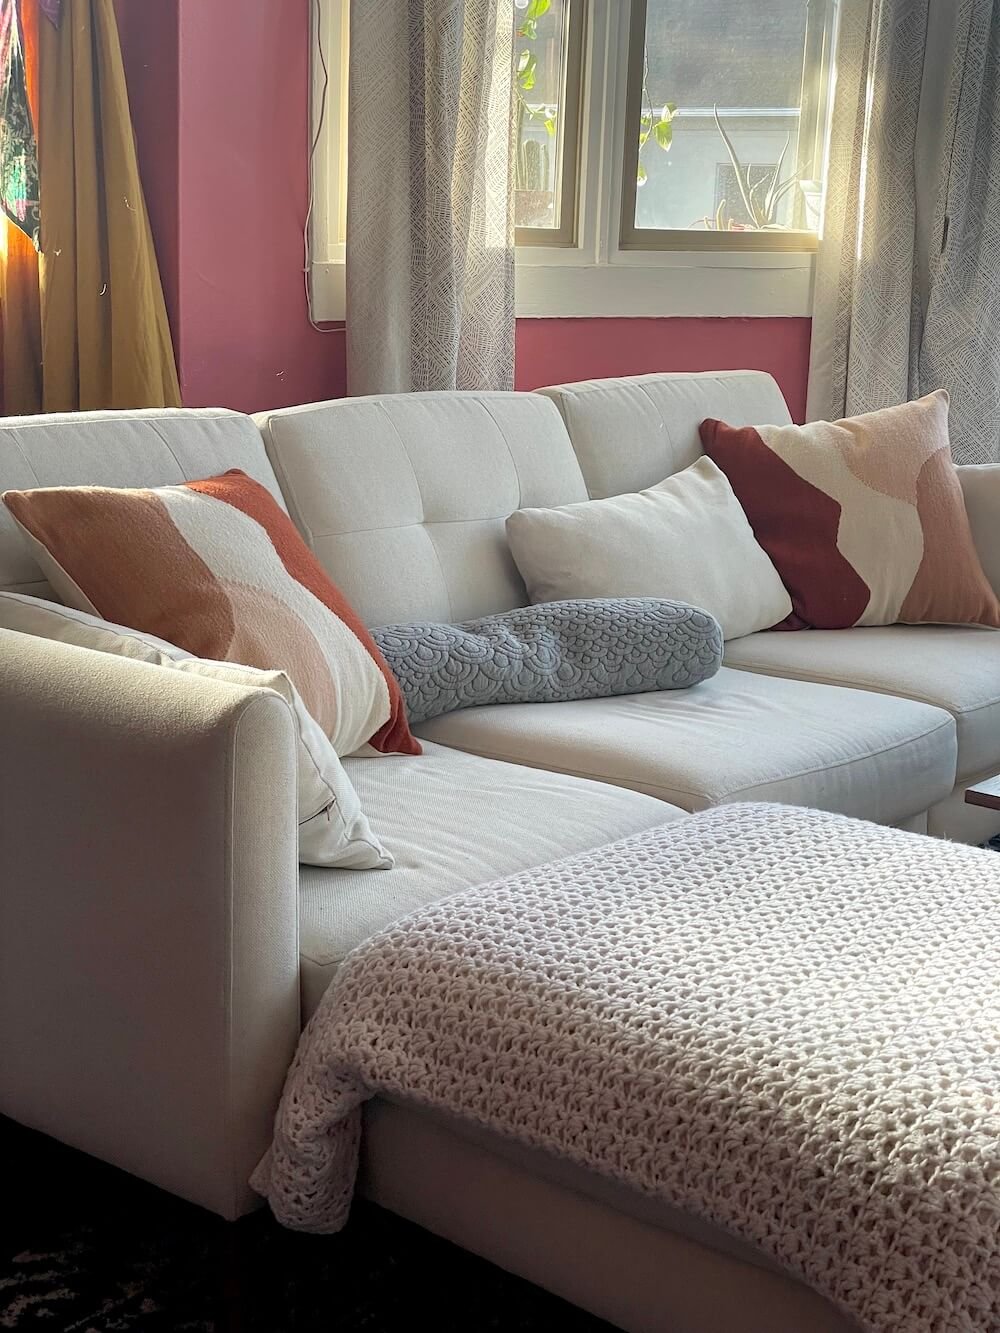 Cozy up your couch with these back-support cushions